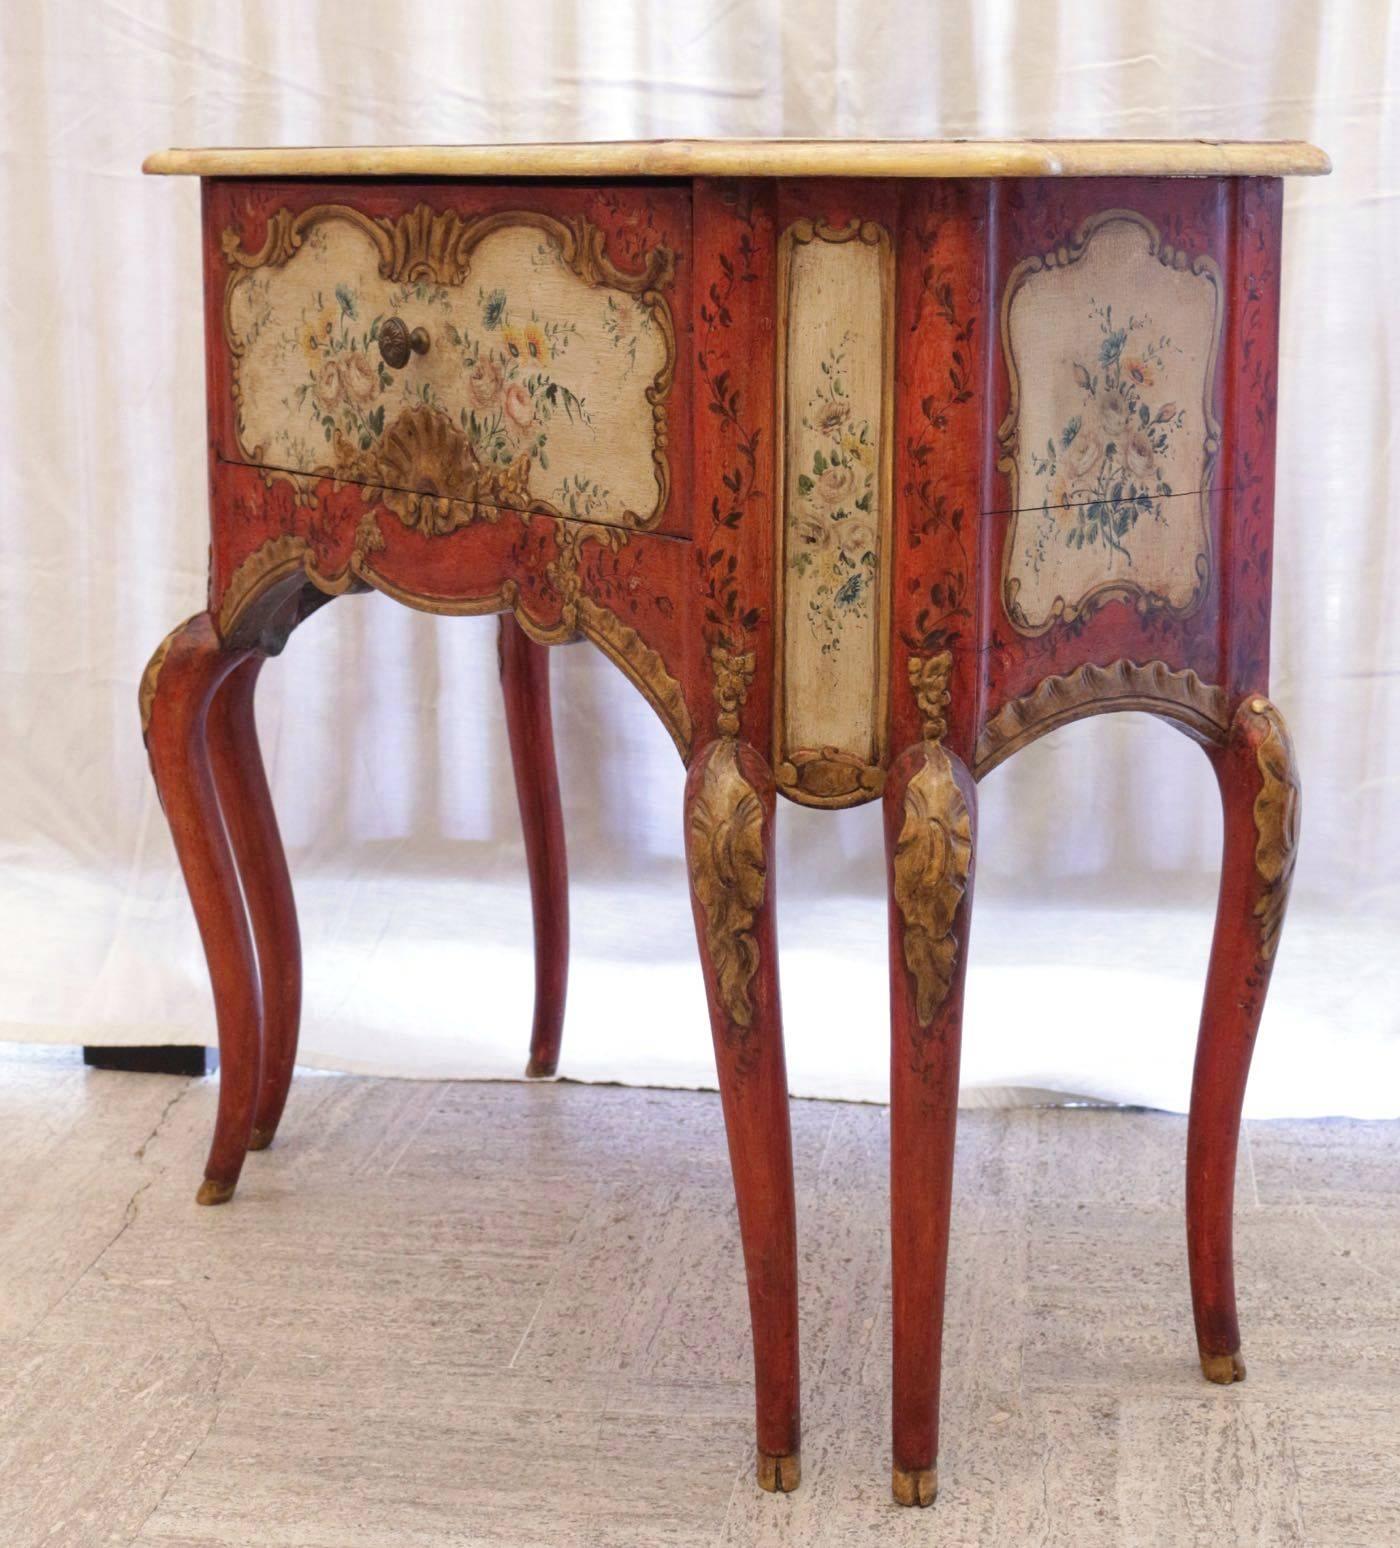 19th Century Decorative Pair of Polychrome Italian Commodes, Bedside Tables